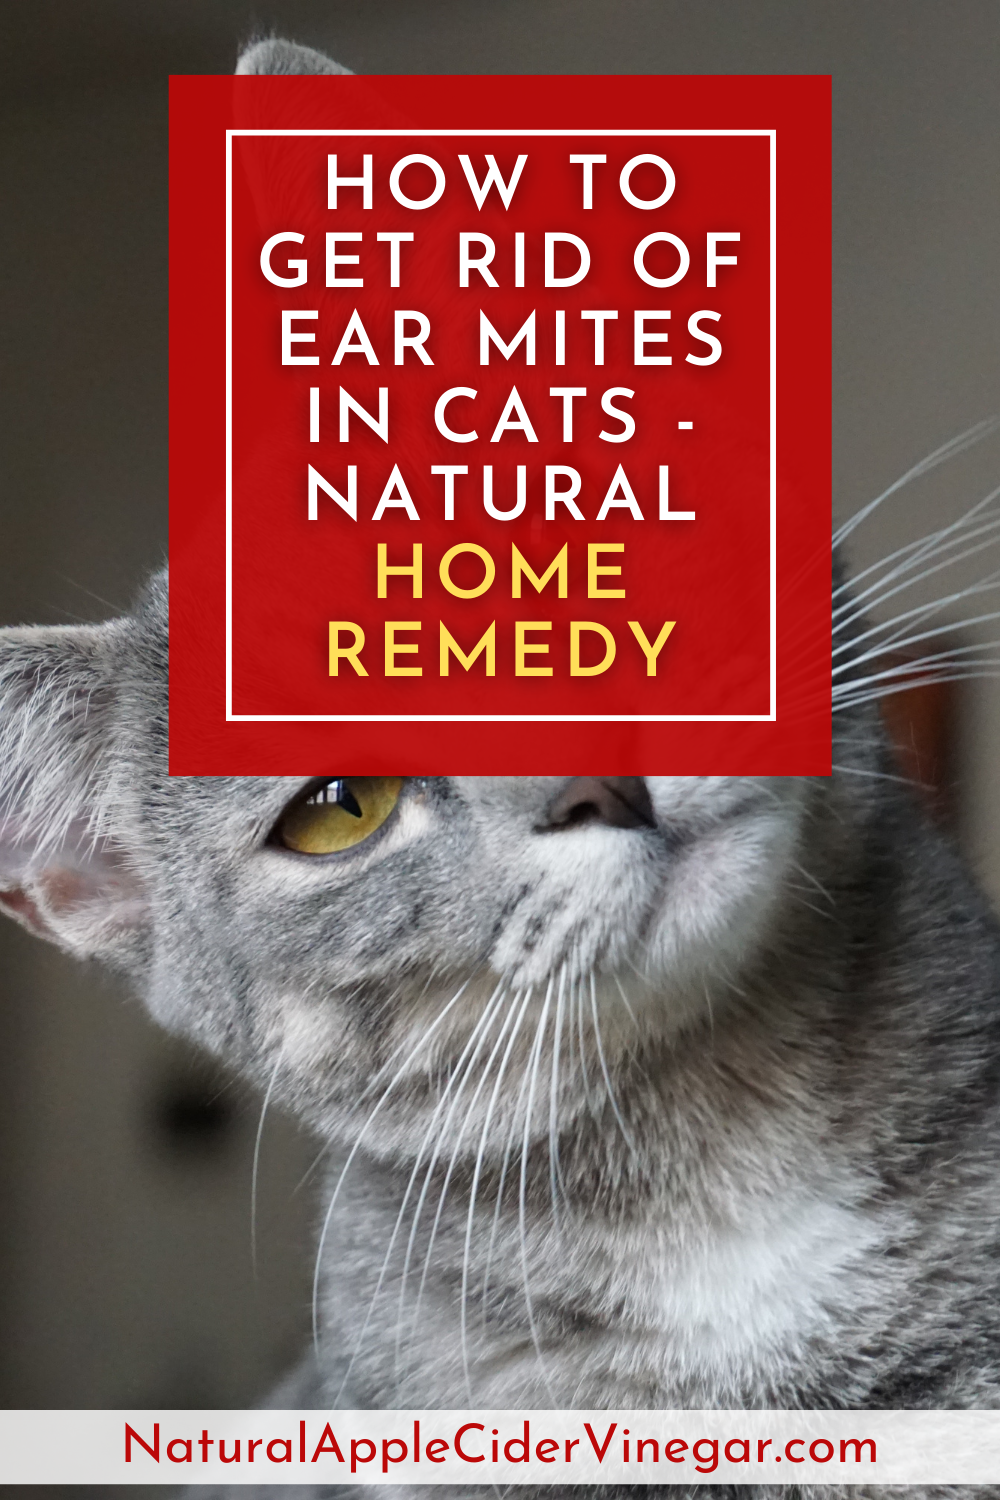 How to Get Rid of Ear Mites in Cats